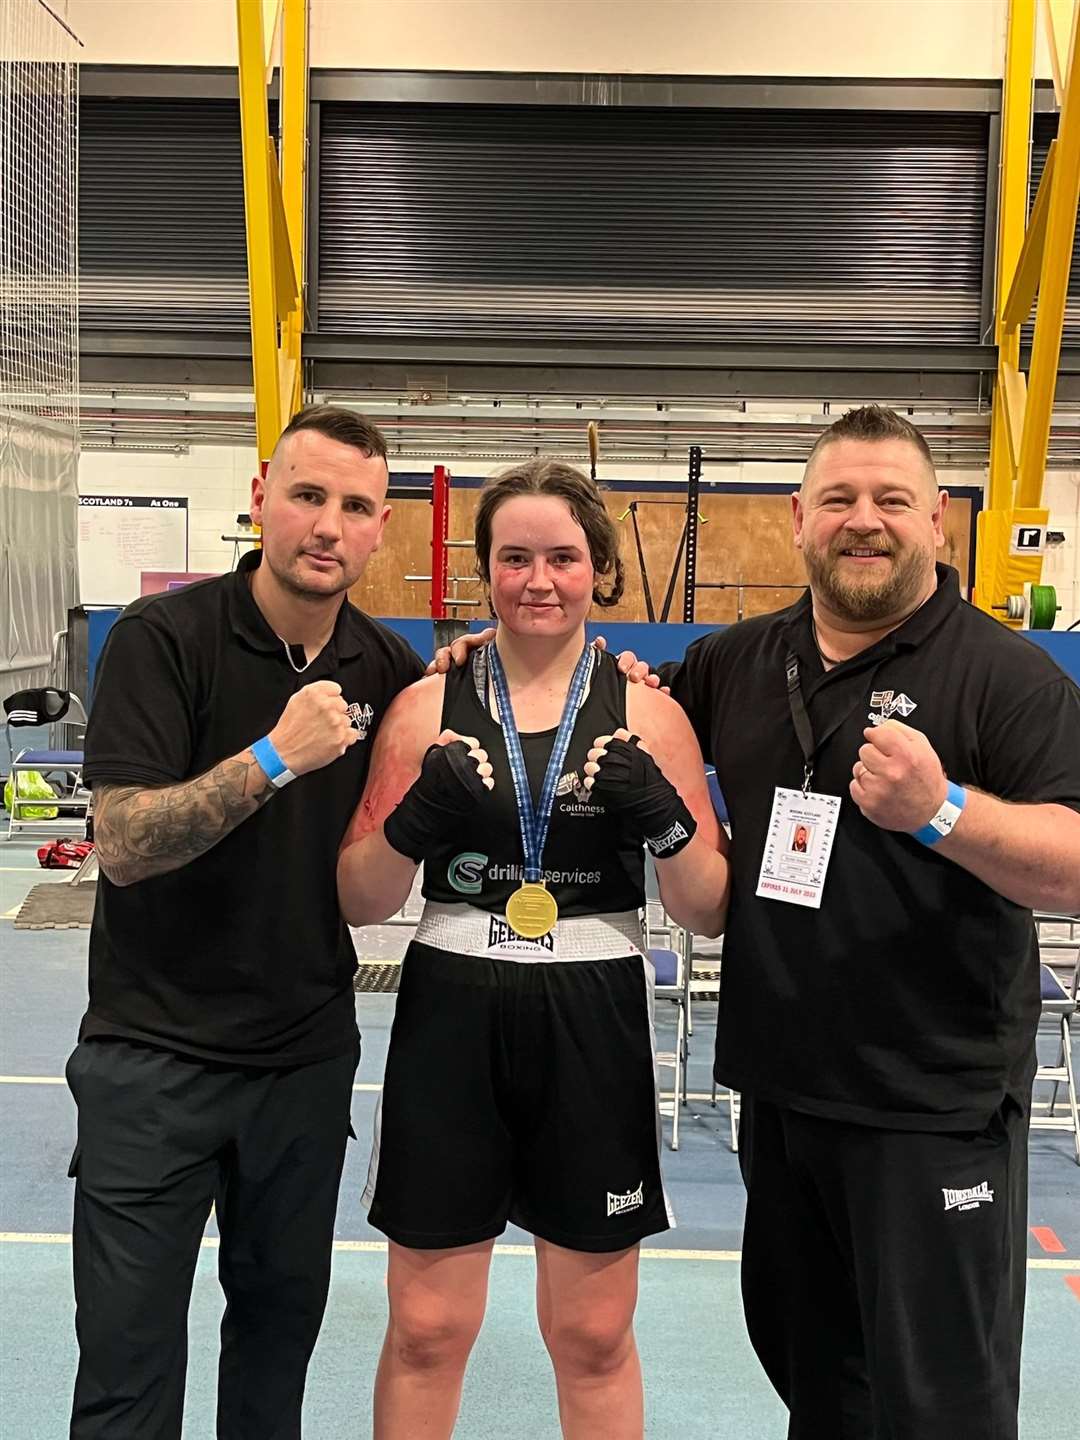 Alisha Mackay with Caithness Boxing Club's founder and head coach Liall Mackenzie (left) and coach Richard Thurling after her success at the Boxing Scotland National Development Championships.